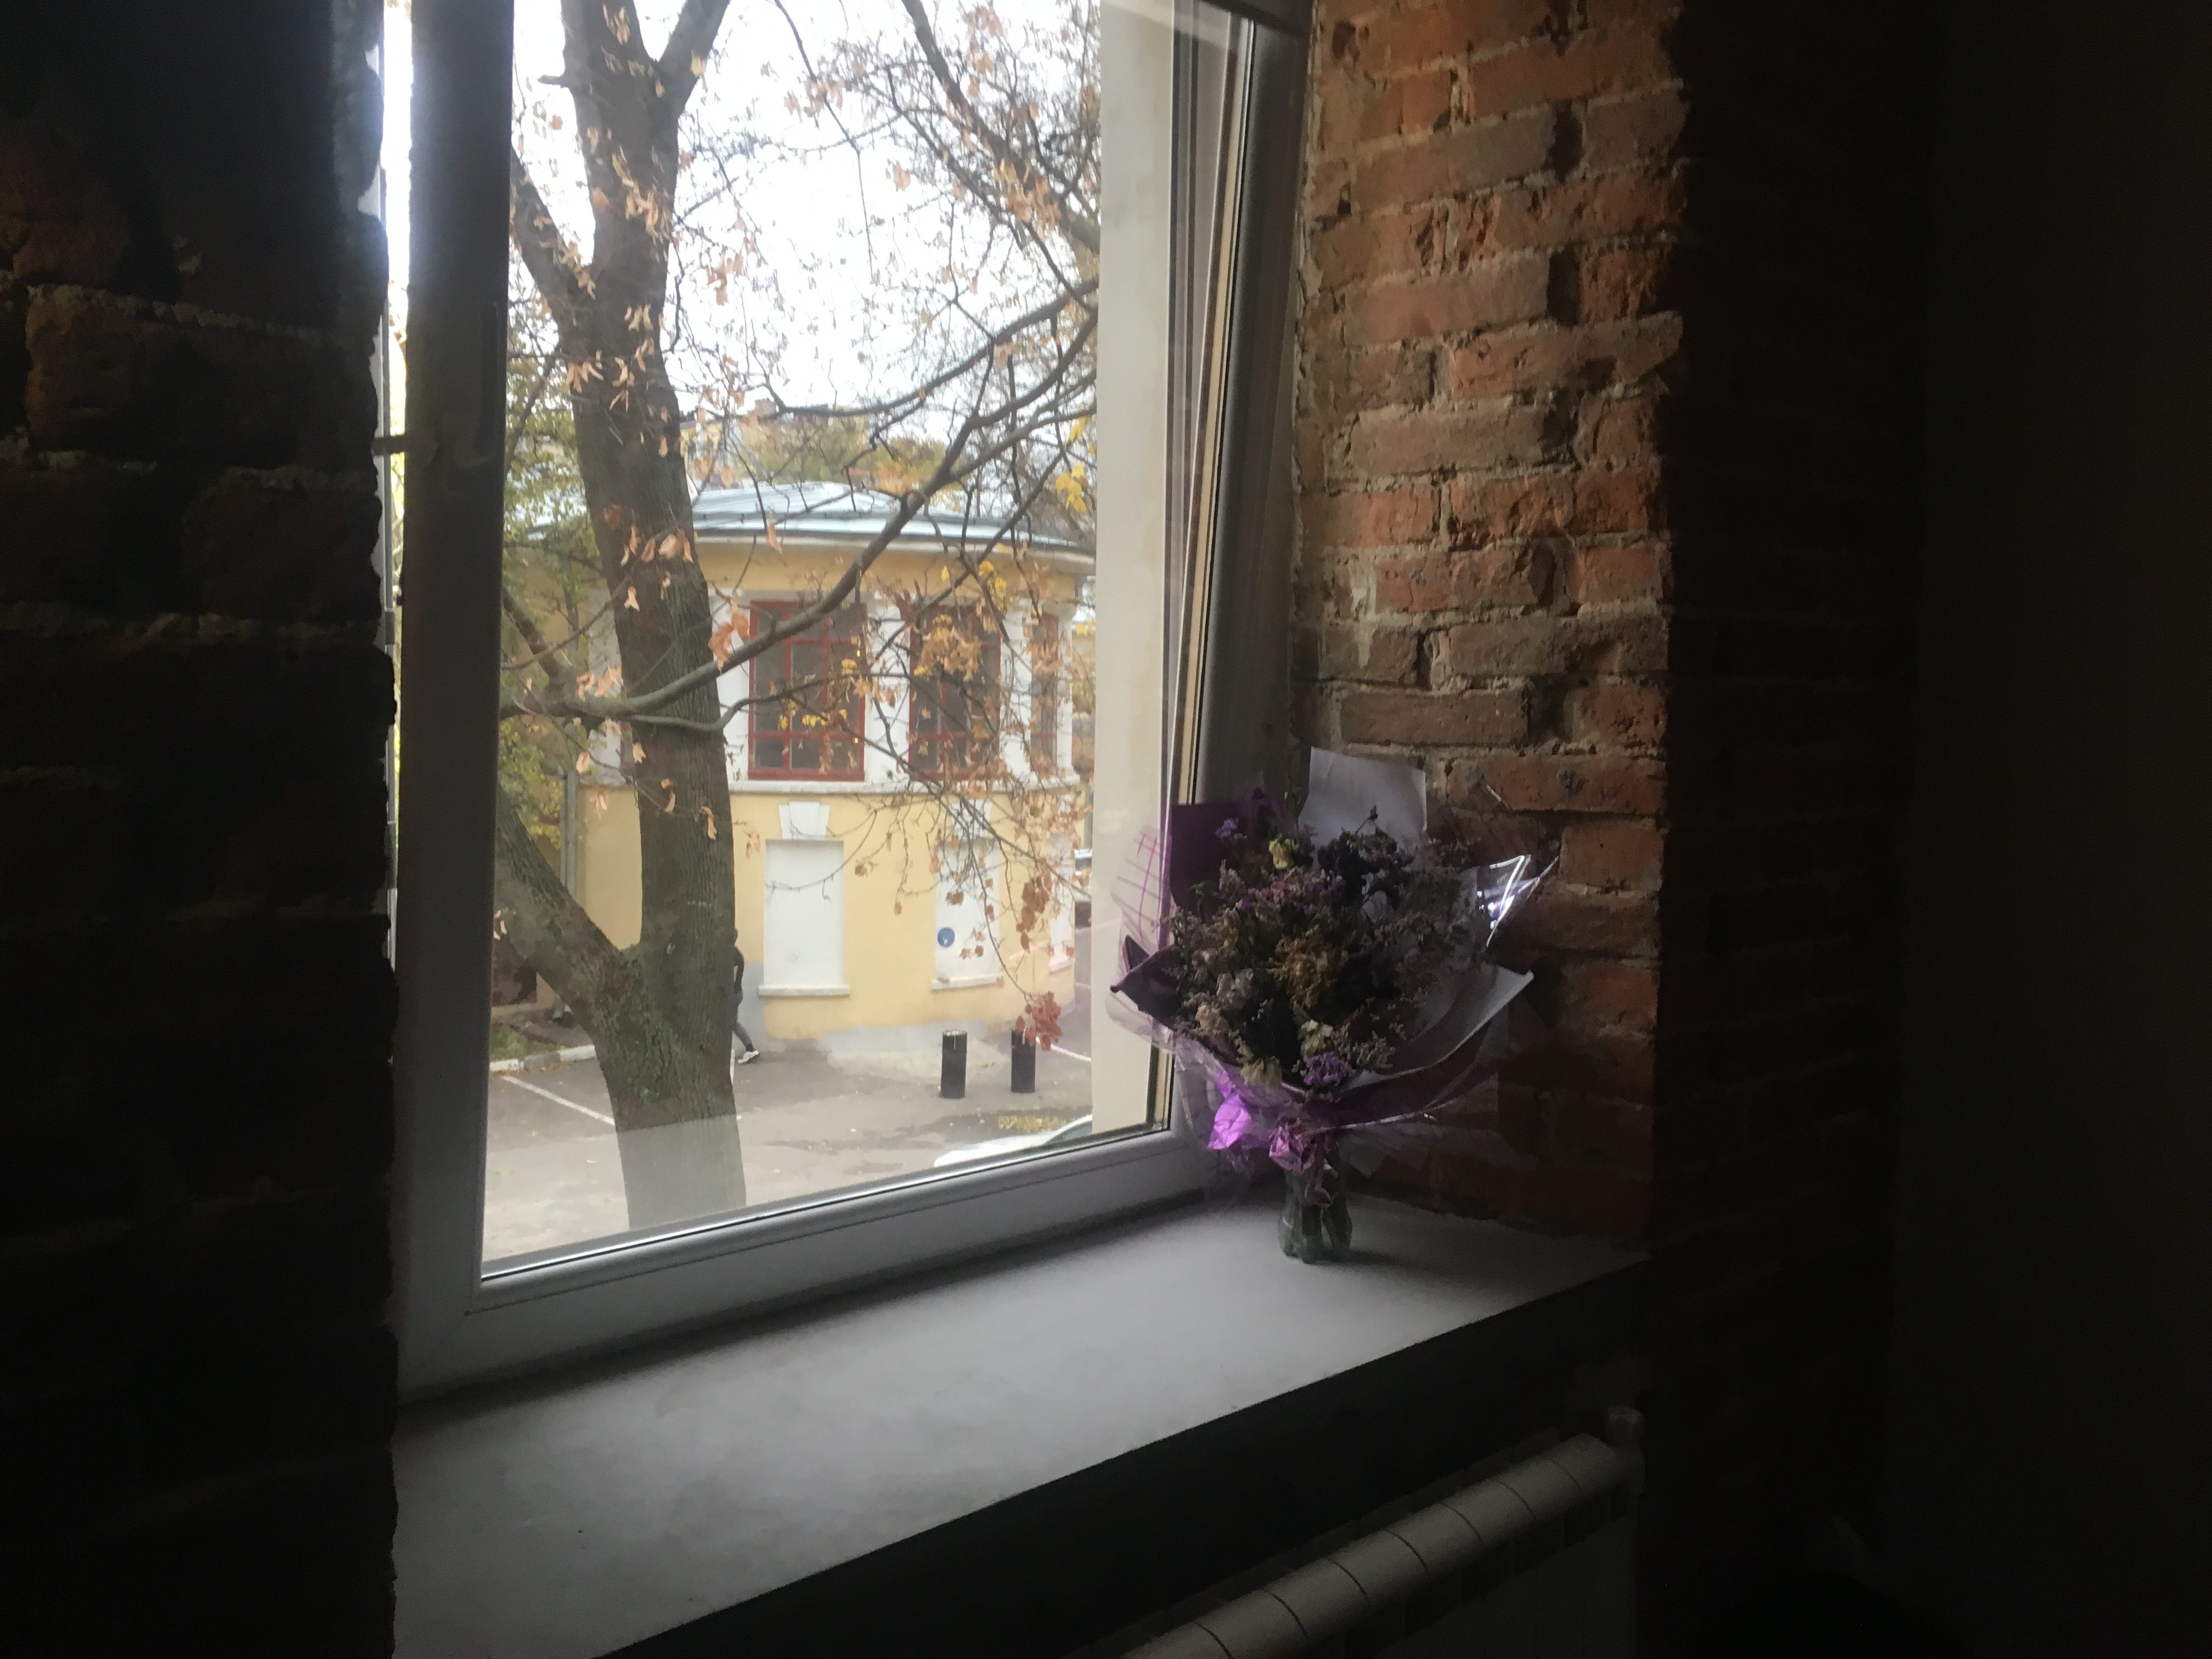 Sad dried flowers in hostel. Which girl do they belong to? Can you see him leaving in the background?